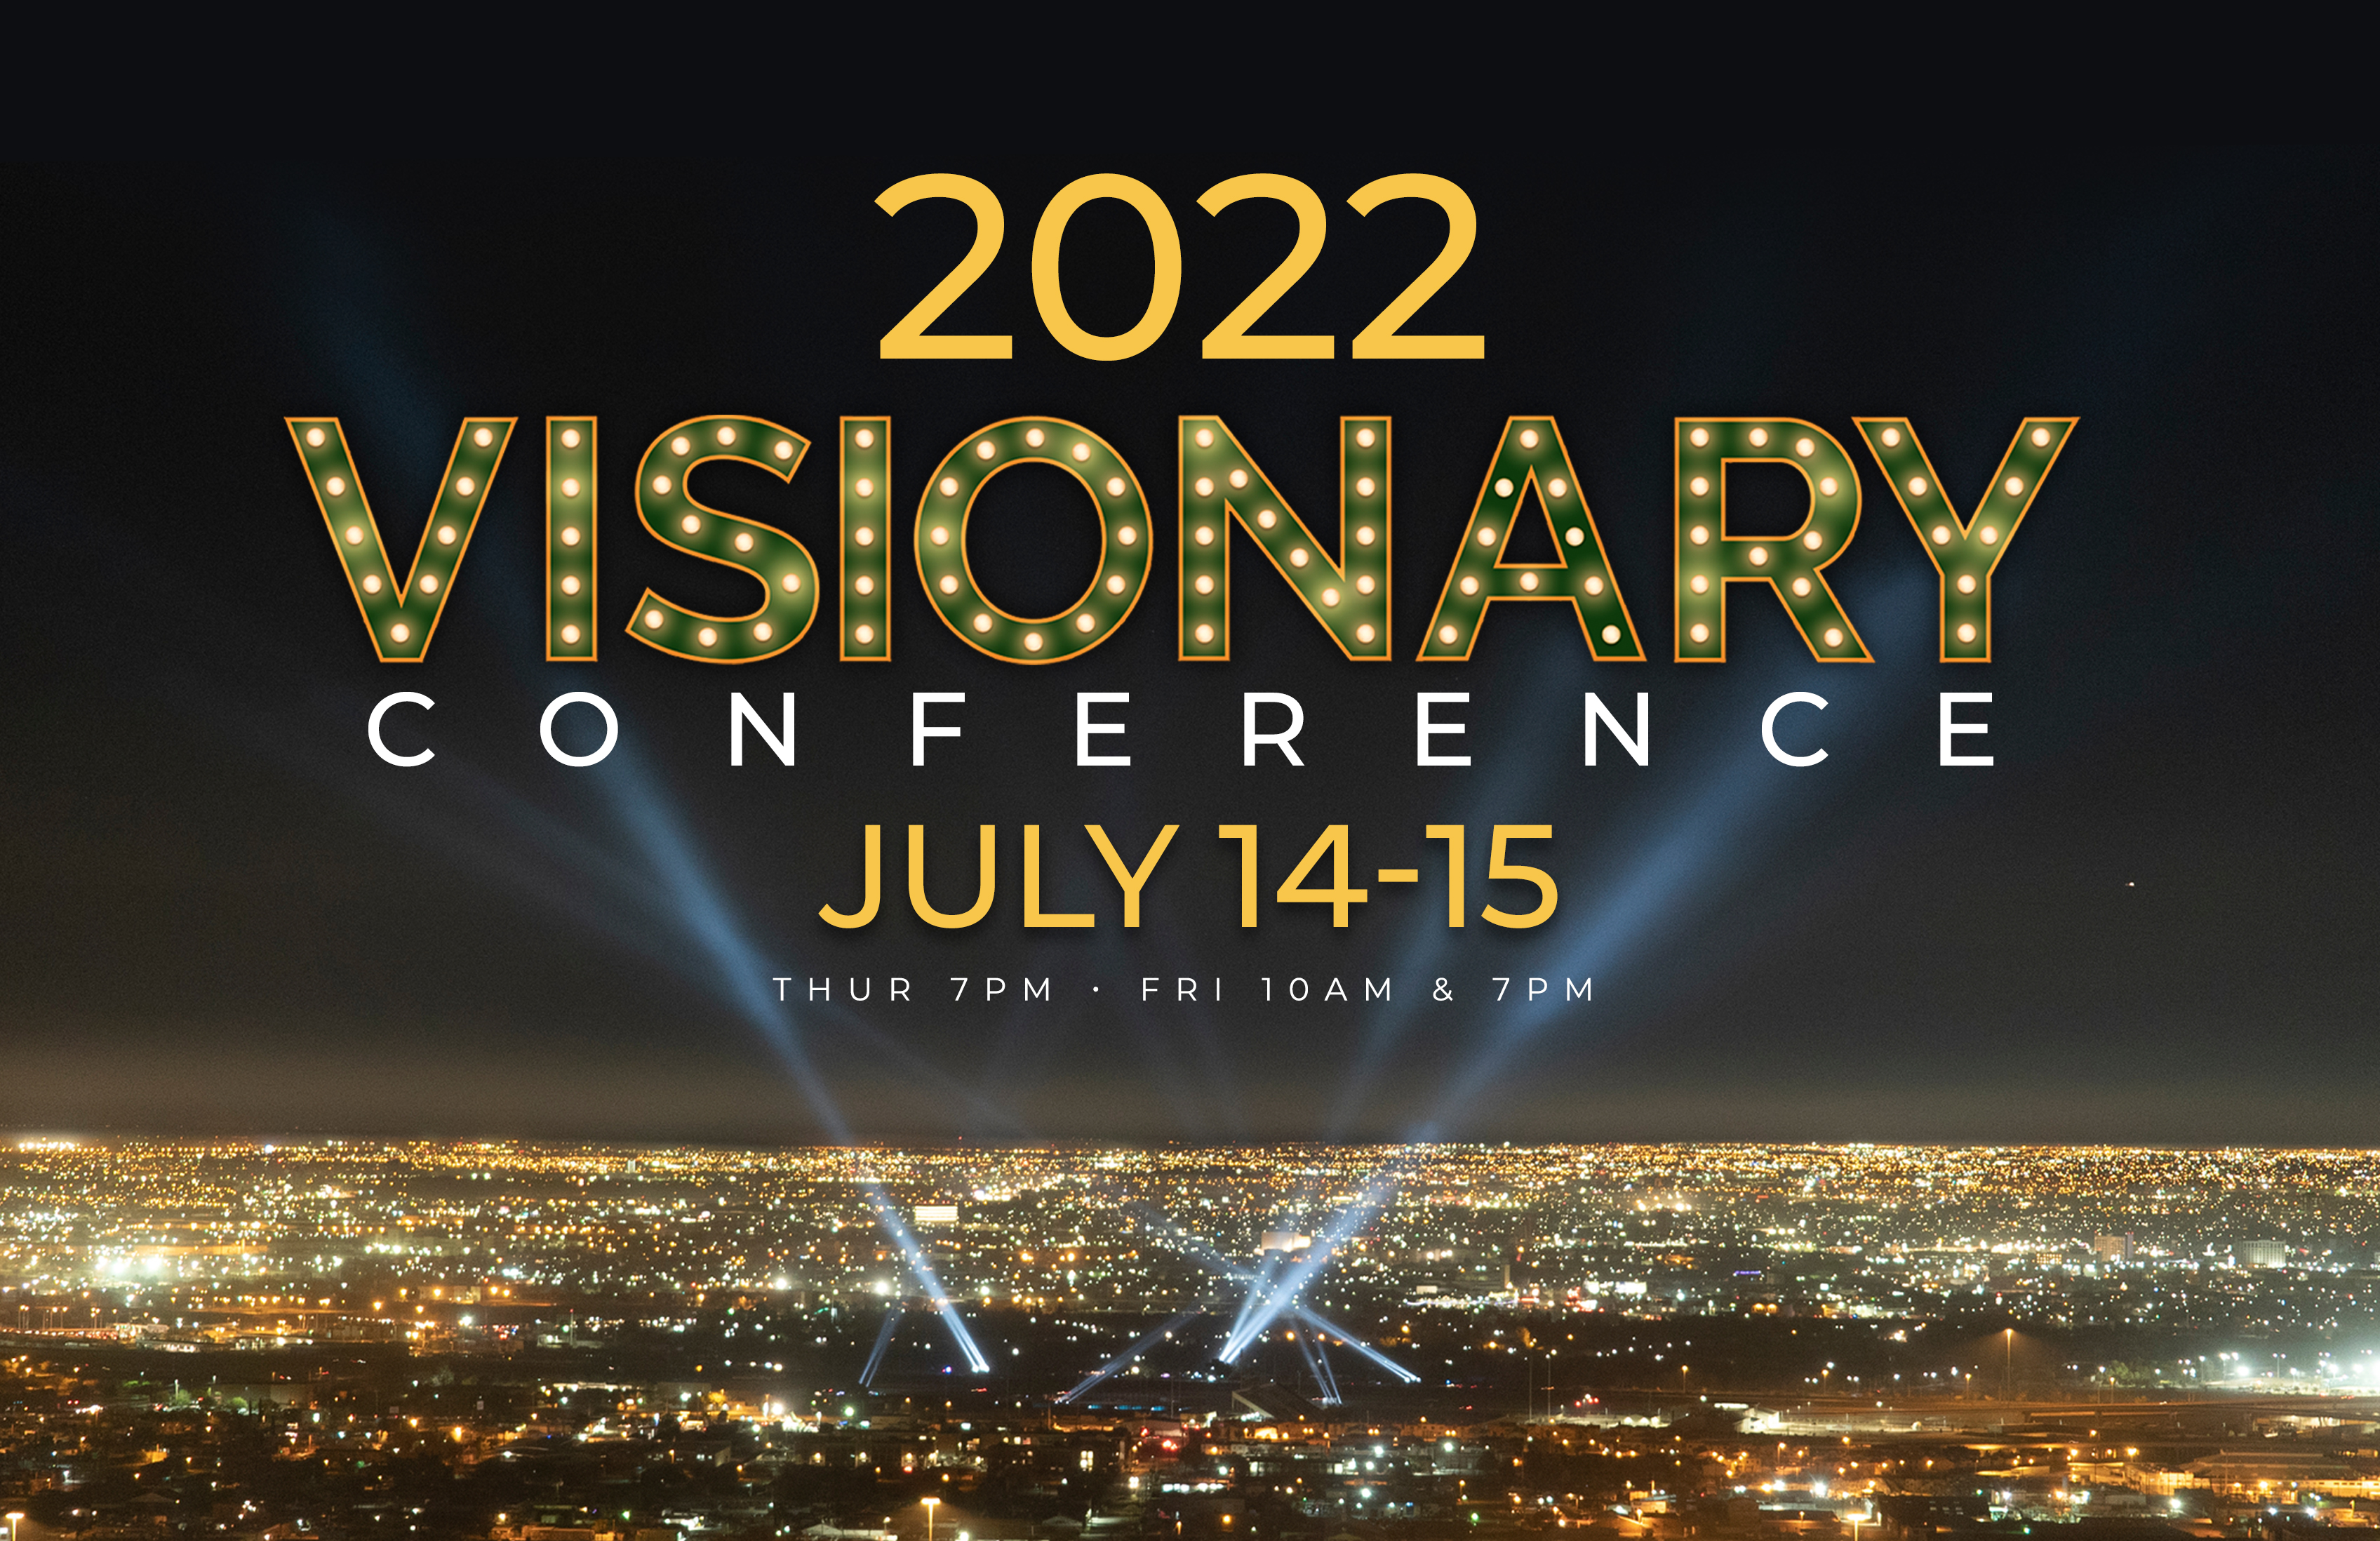 Jesse Duplantis Schedule 2022 2022 Visionary Conference